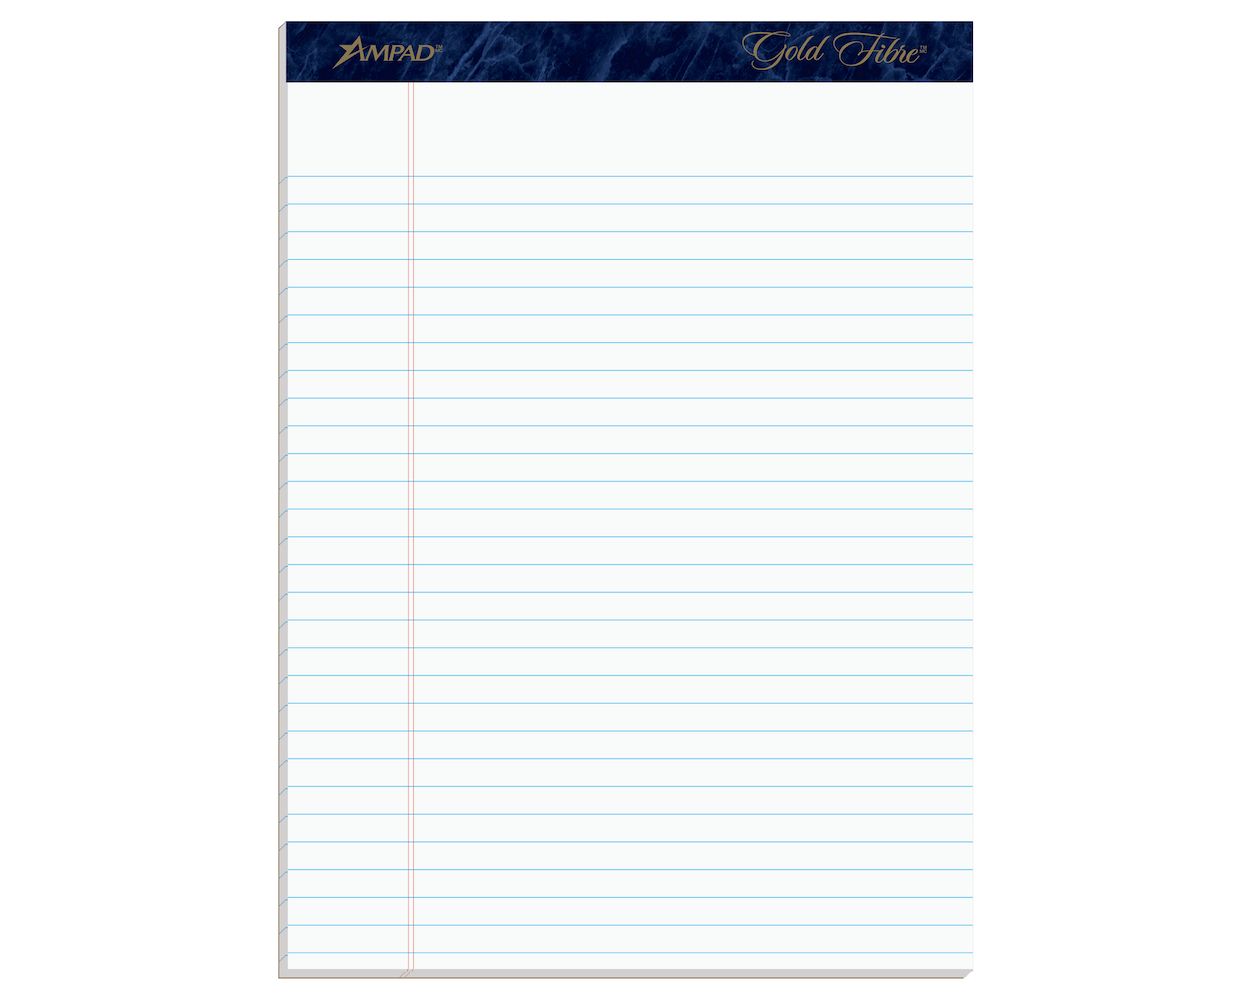 Ampad Gold Fibre Wirebound Writing Pad w/Cover 8 1/2 x 11 3/4 White Navy Cover 